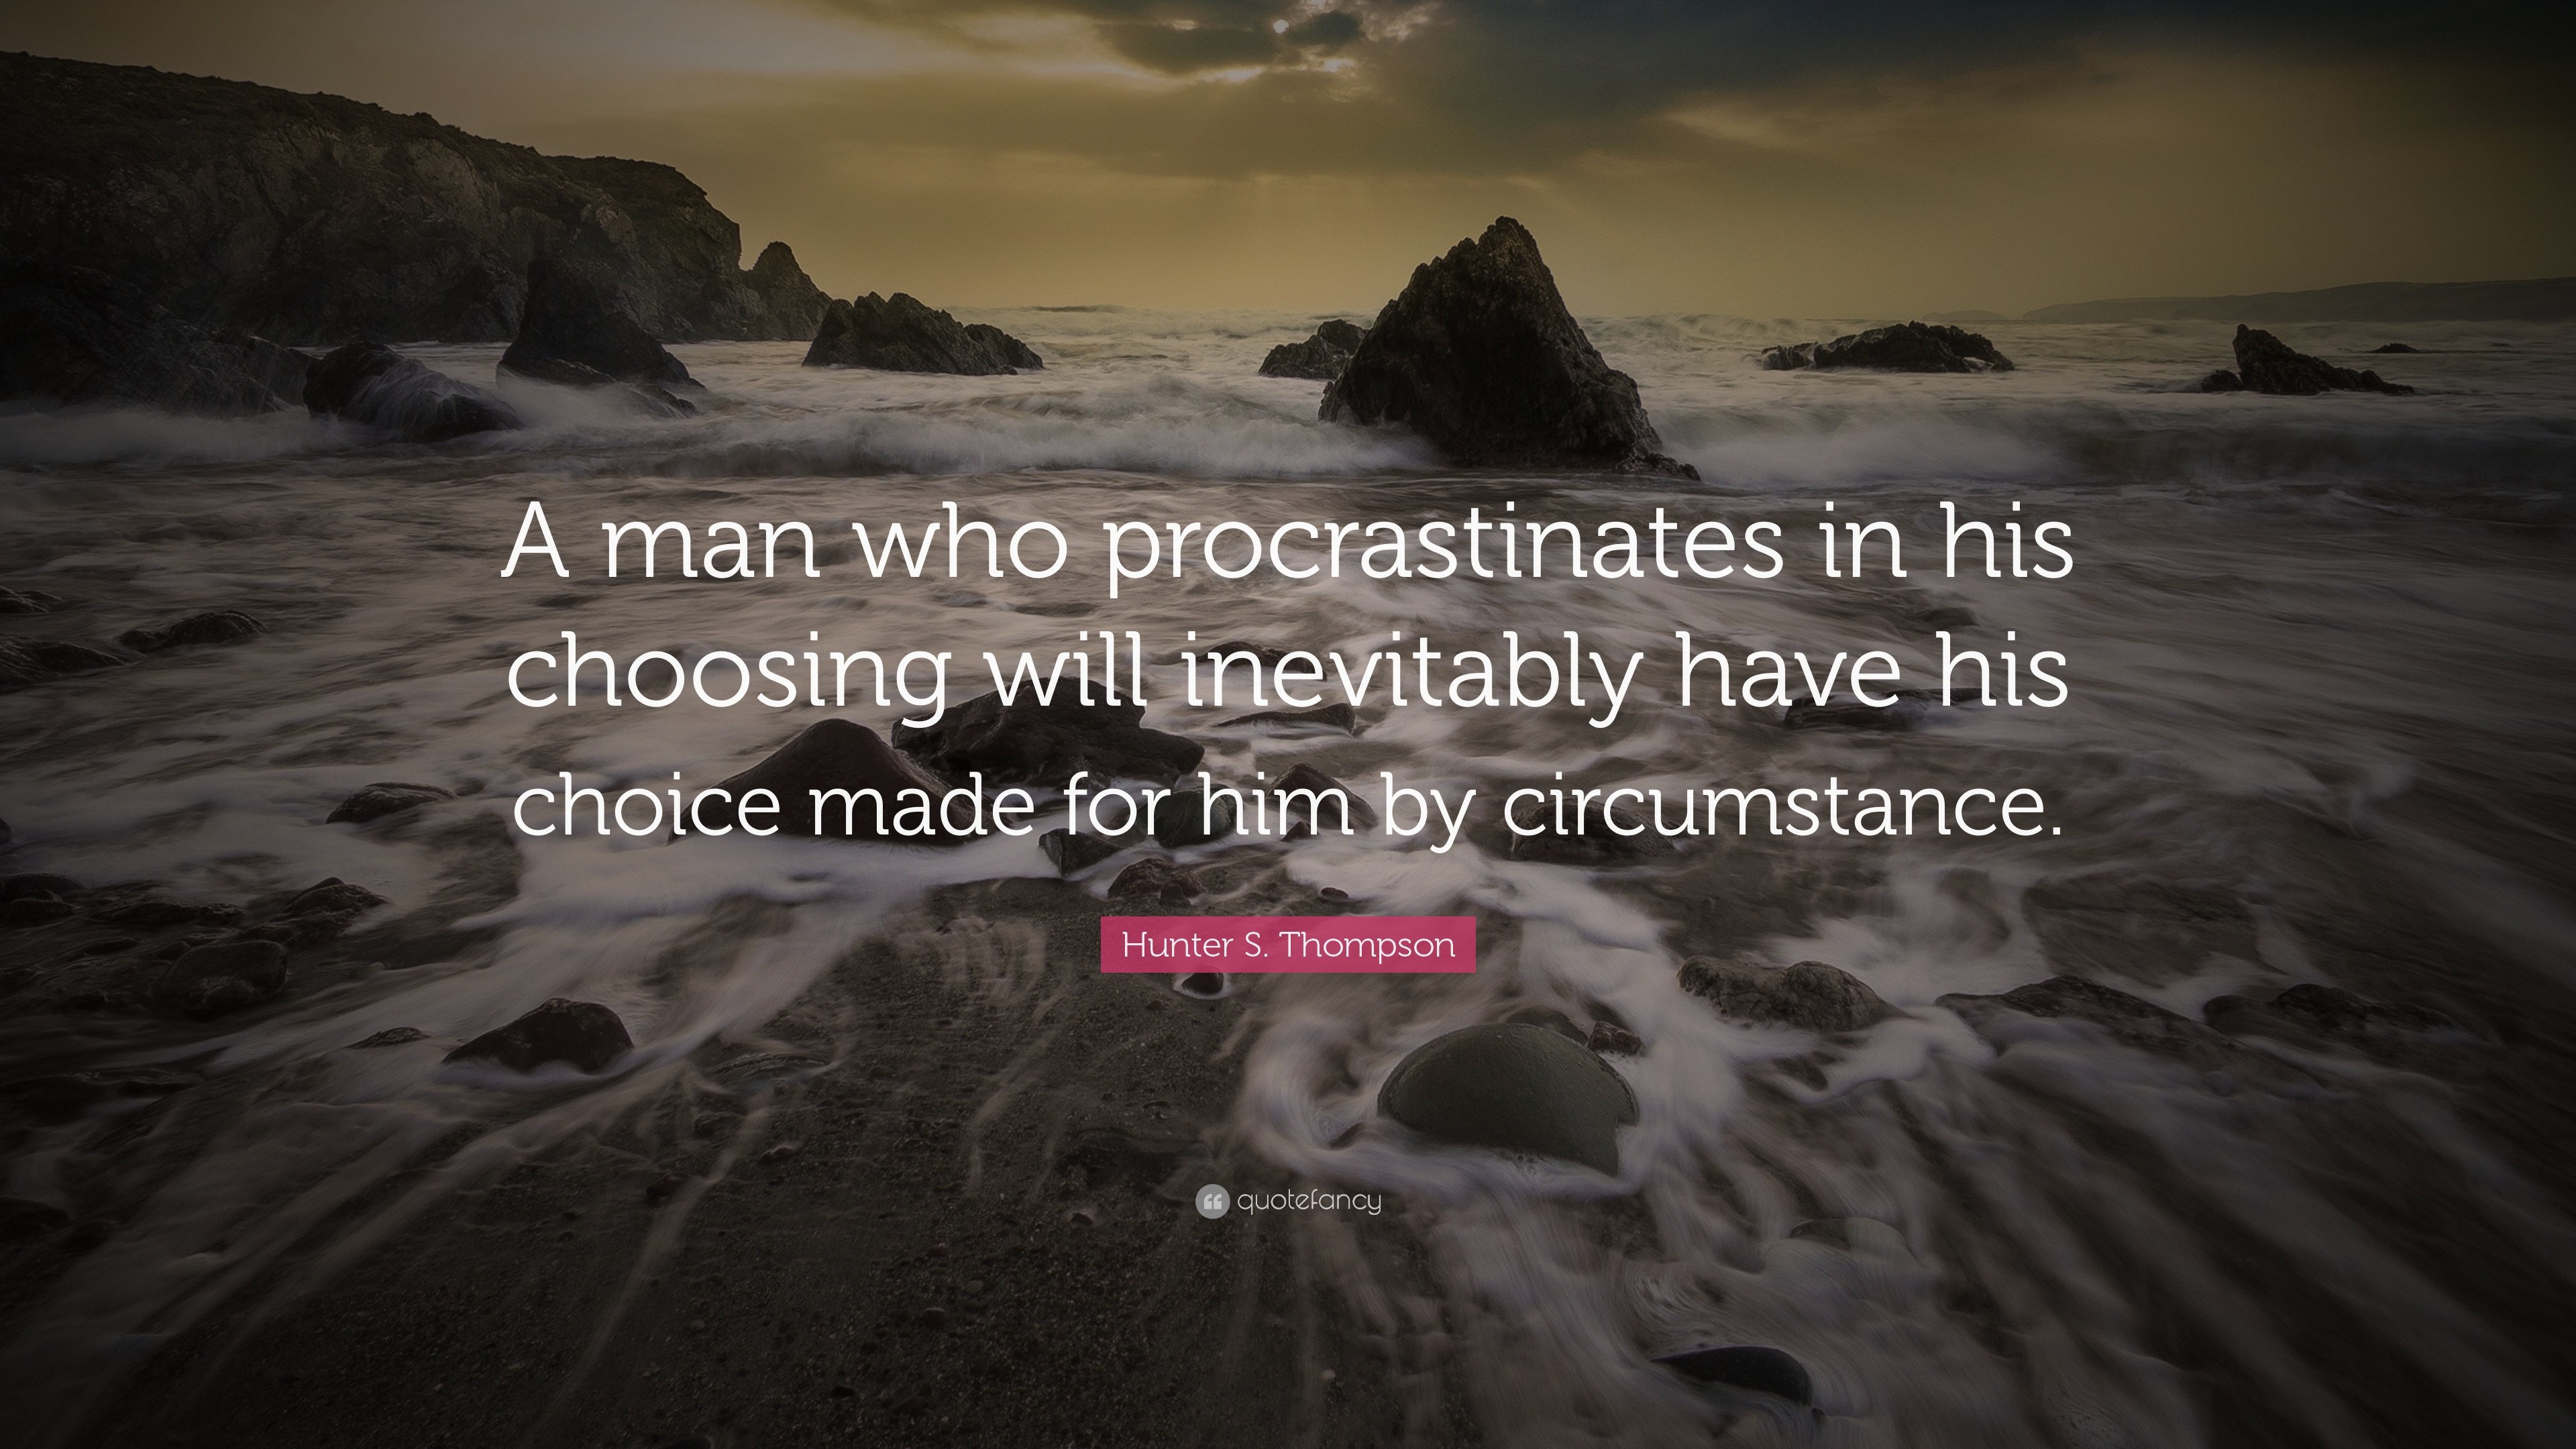 3840x2160 Hunter S. Thompson Quote: “A man who procrastinates in his choosing will  inevitably